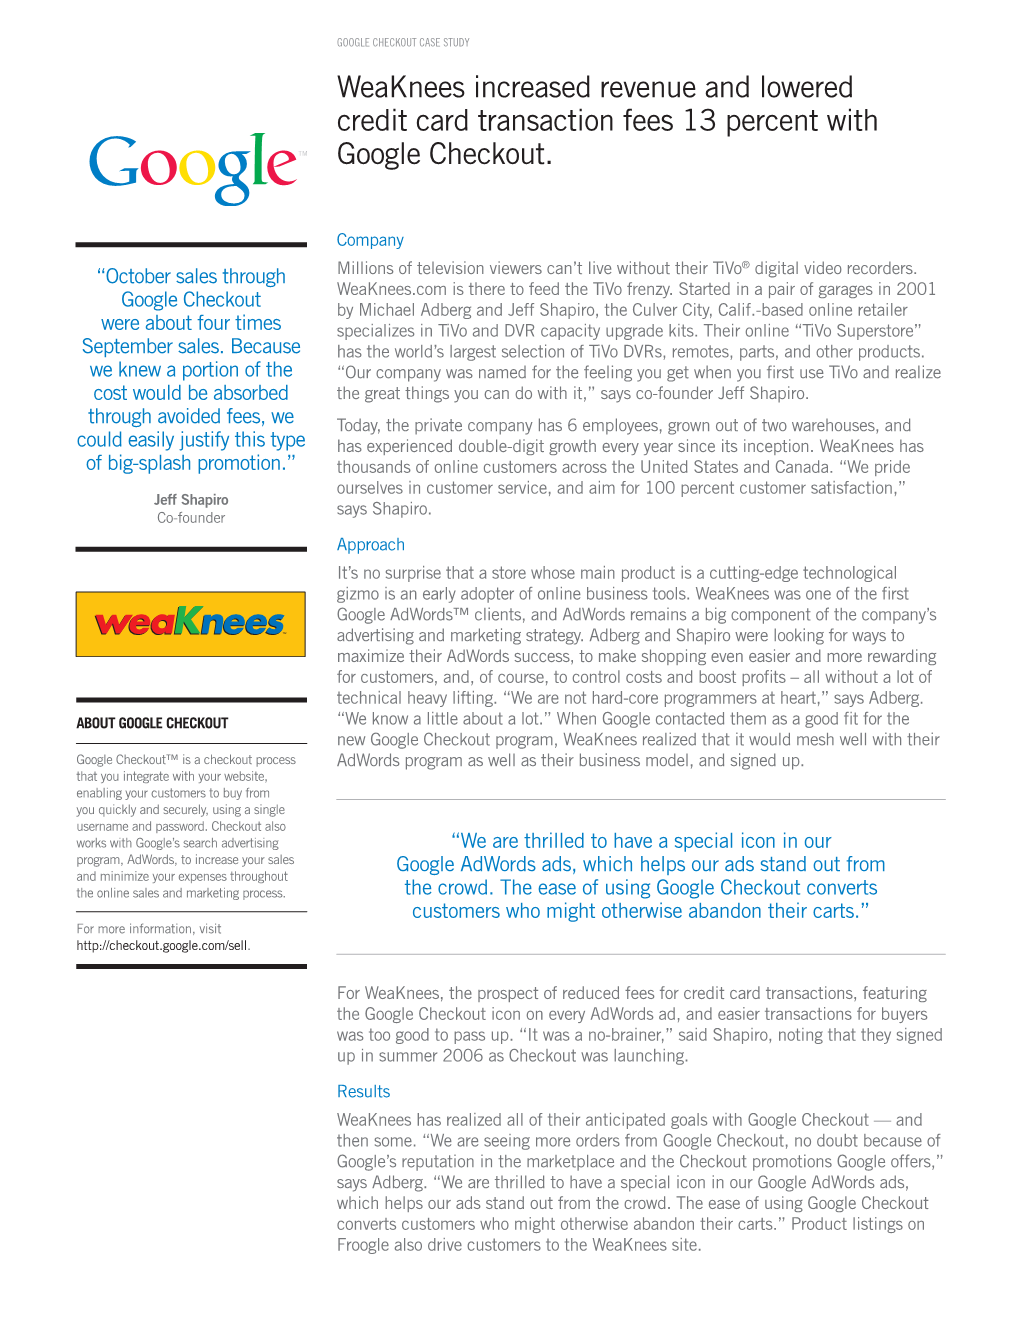 Weaknees Increased Revenue and Lowered Credit Card Transaction Fees 13 Percent with Google Checkout